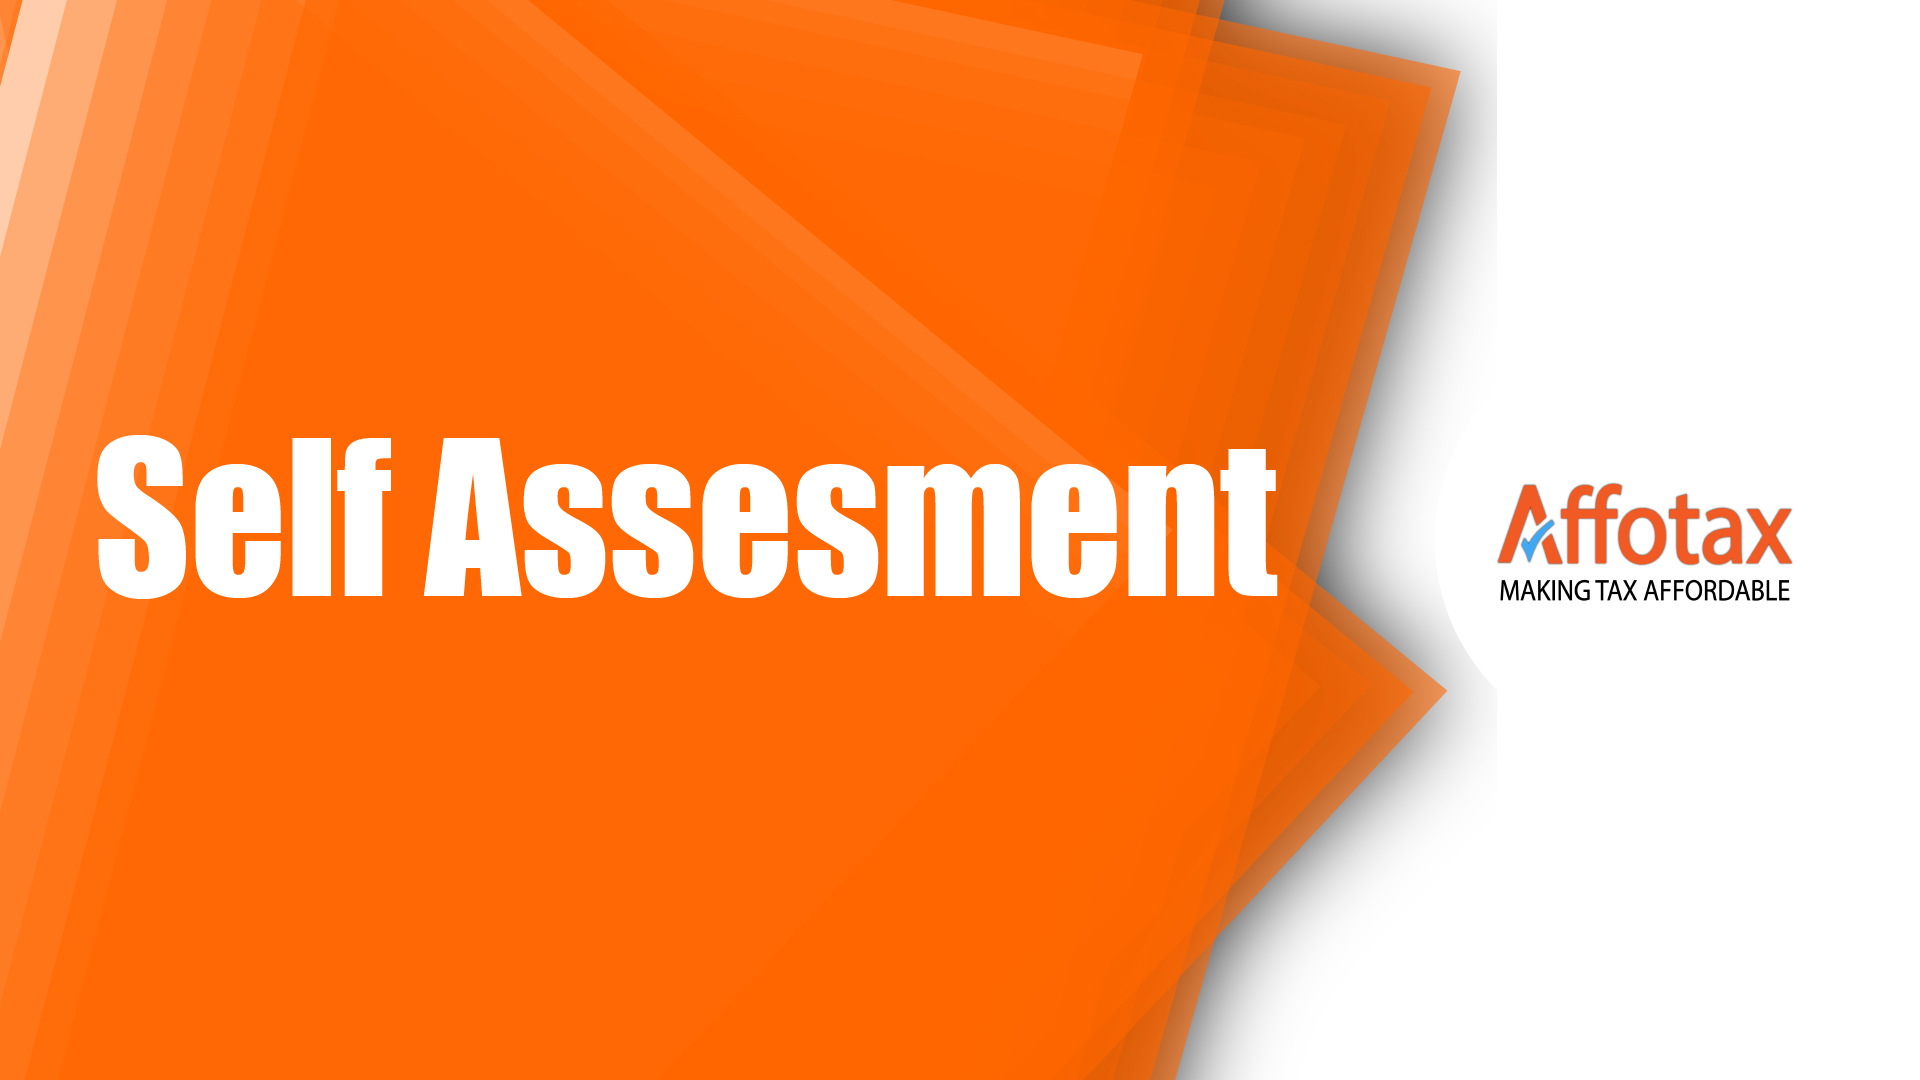 Top 5 Self Assessment Mistakes to Avoid